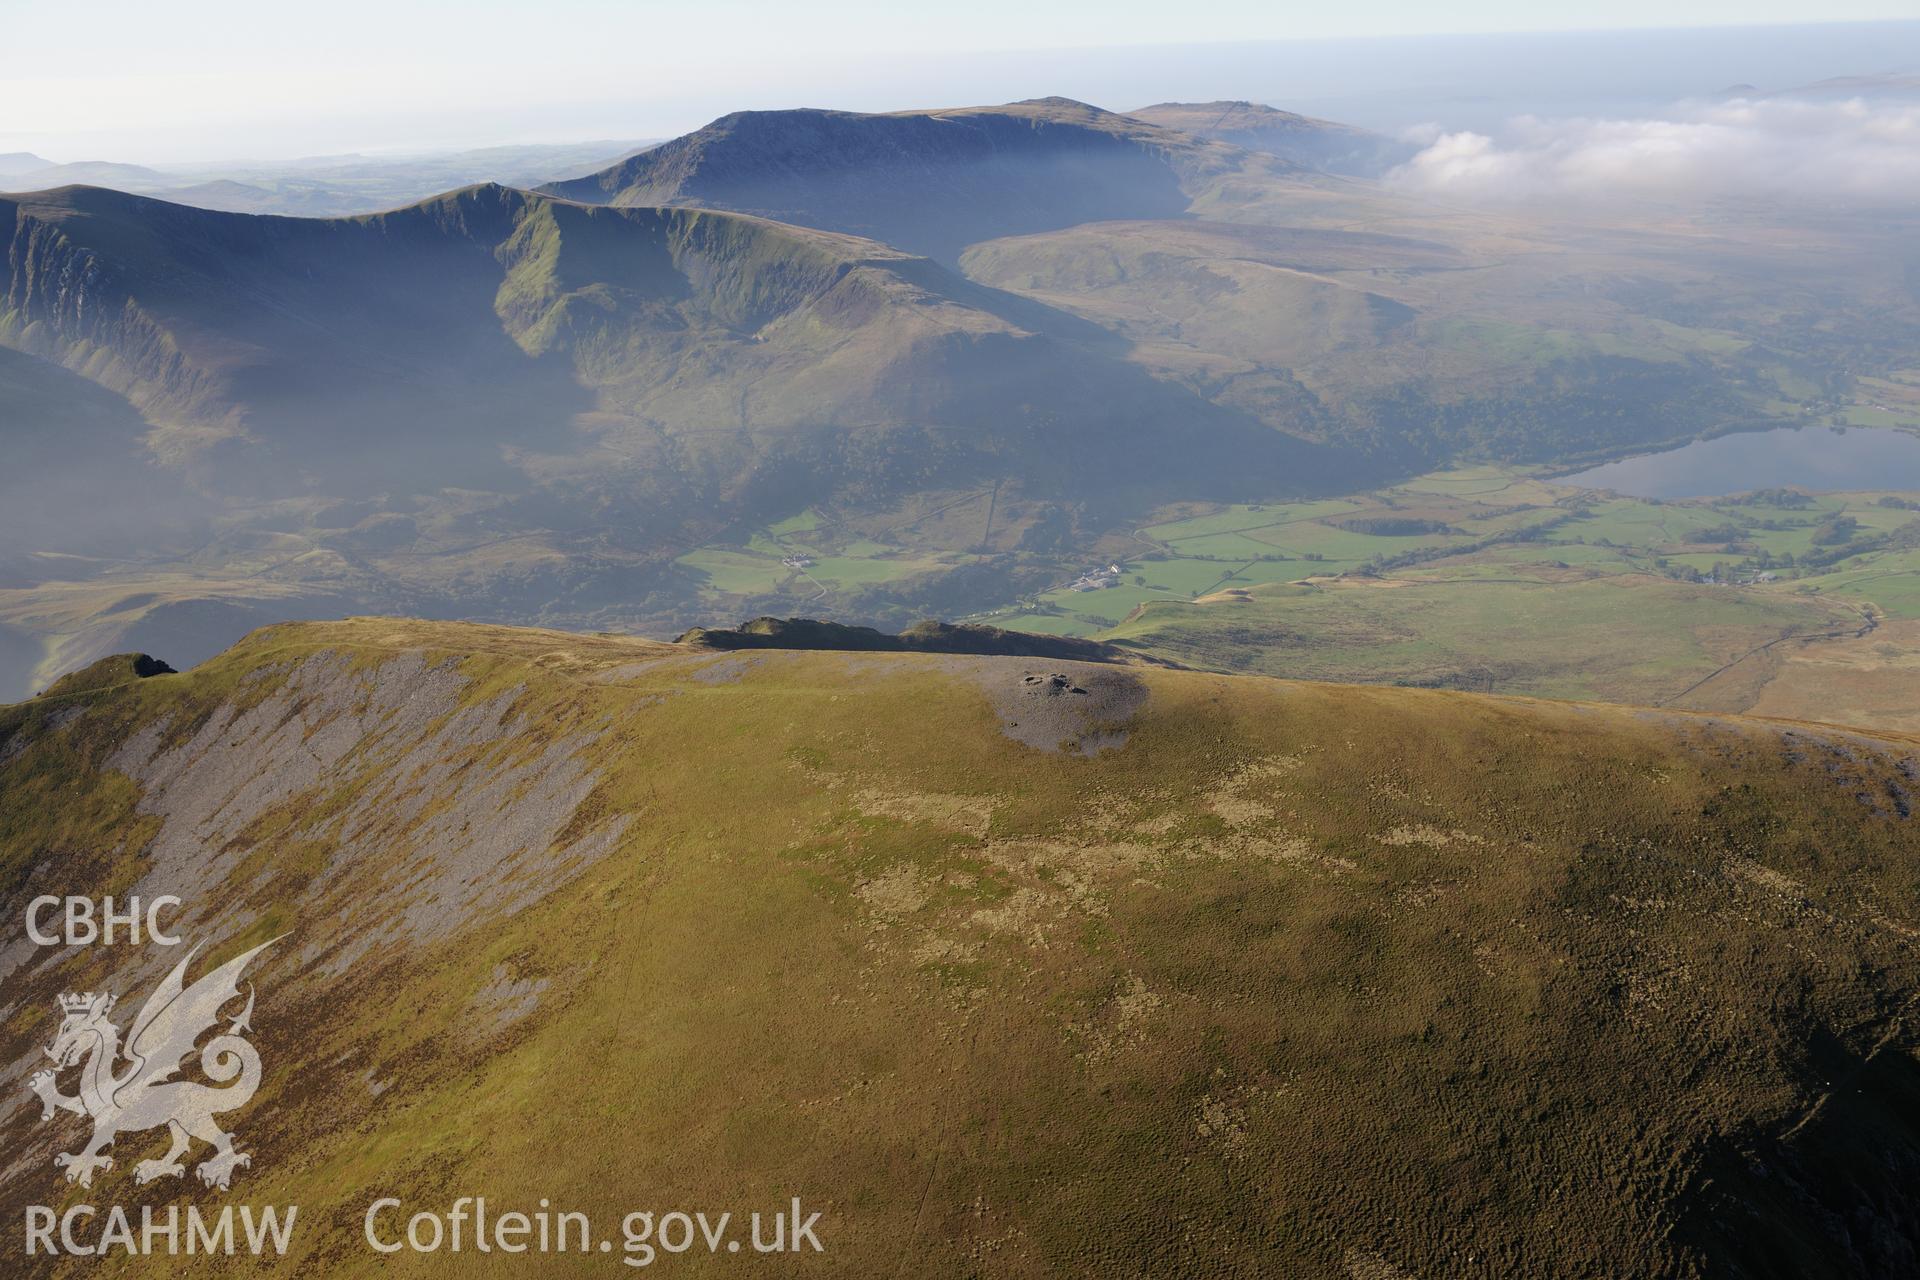 Mynydd Mawr cairn near Nantlle. Oblique aerial photograph taken during the Royal Commission's programme of archaeological aerial reconnaissance by Toby Driver on 2nd October 2015.